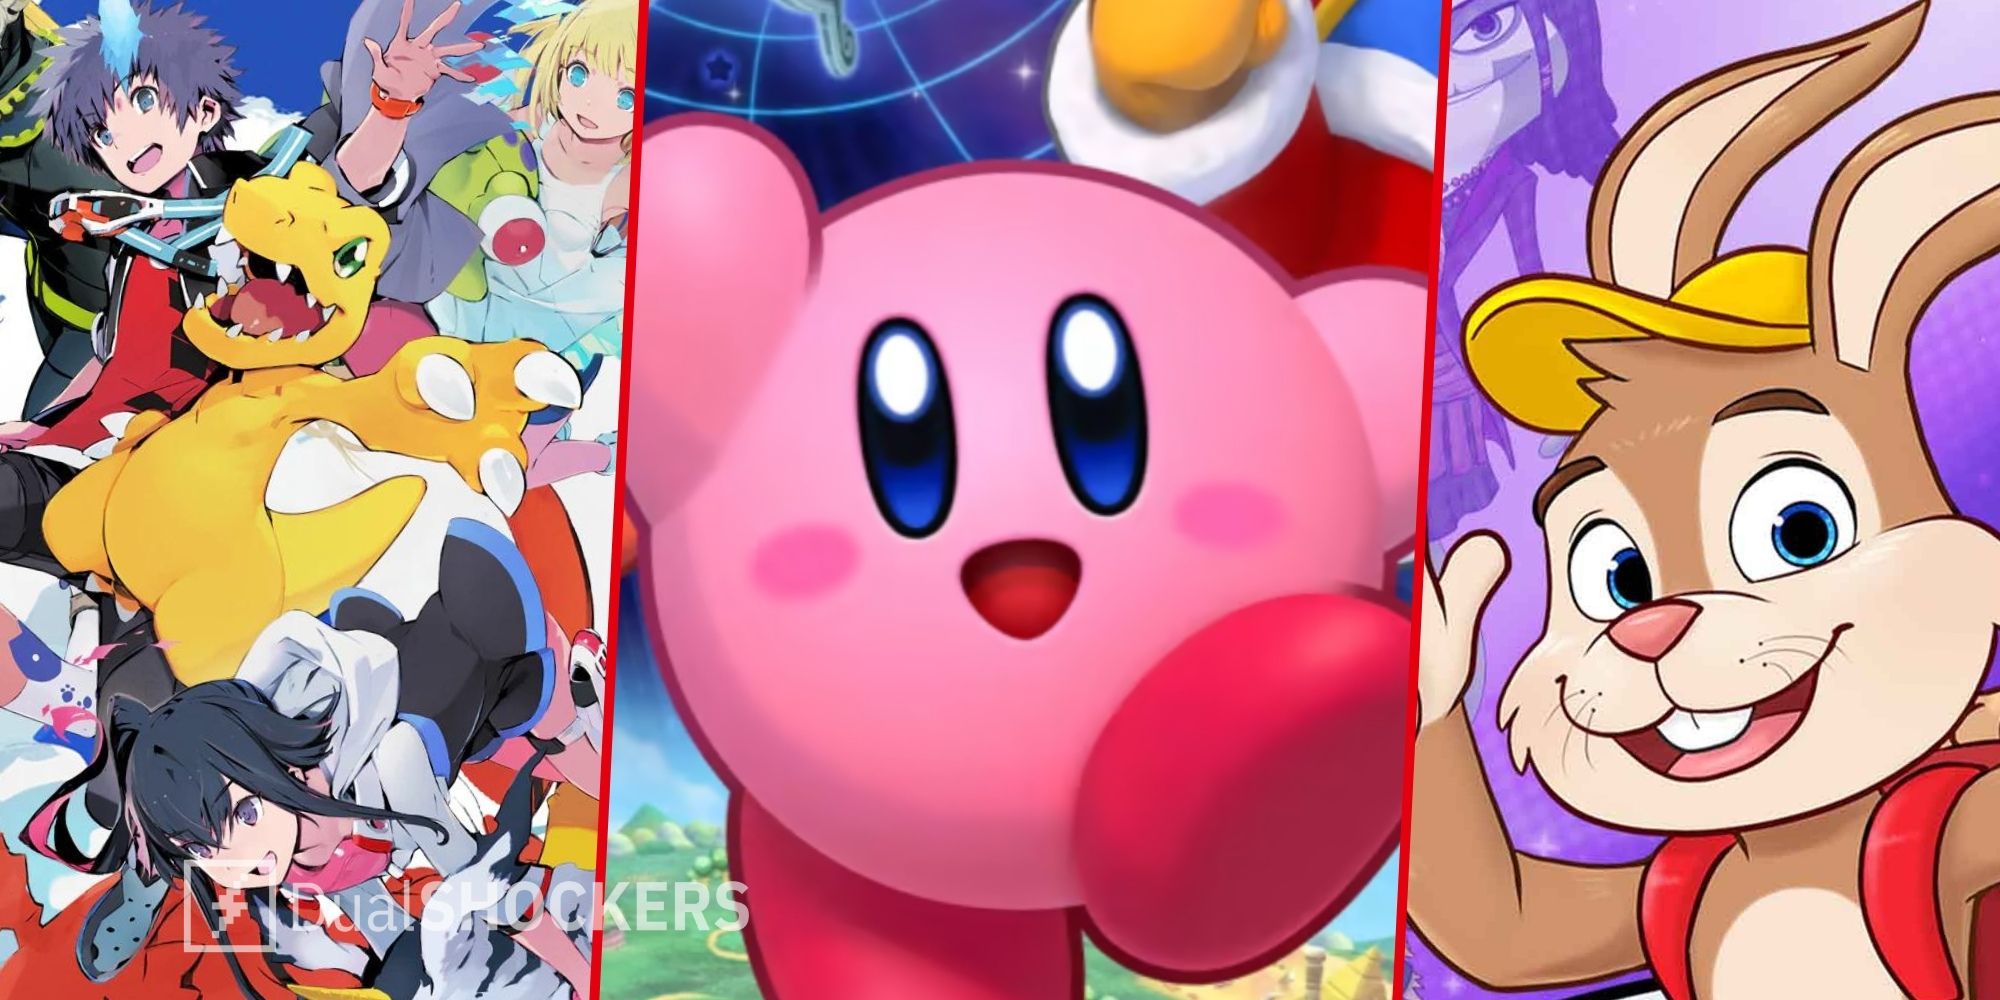 kirby, digimon, and octopath traveler 2 lead the new releases on switch this week